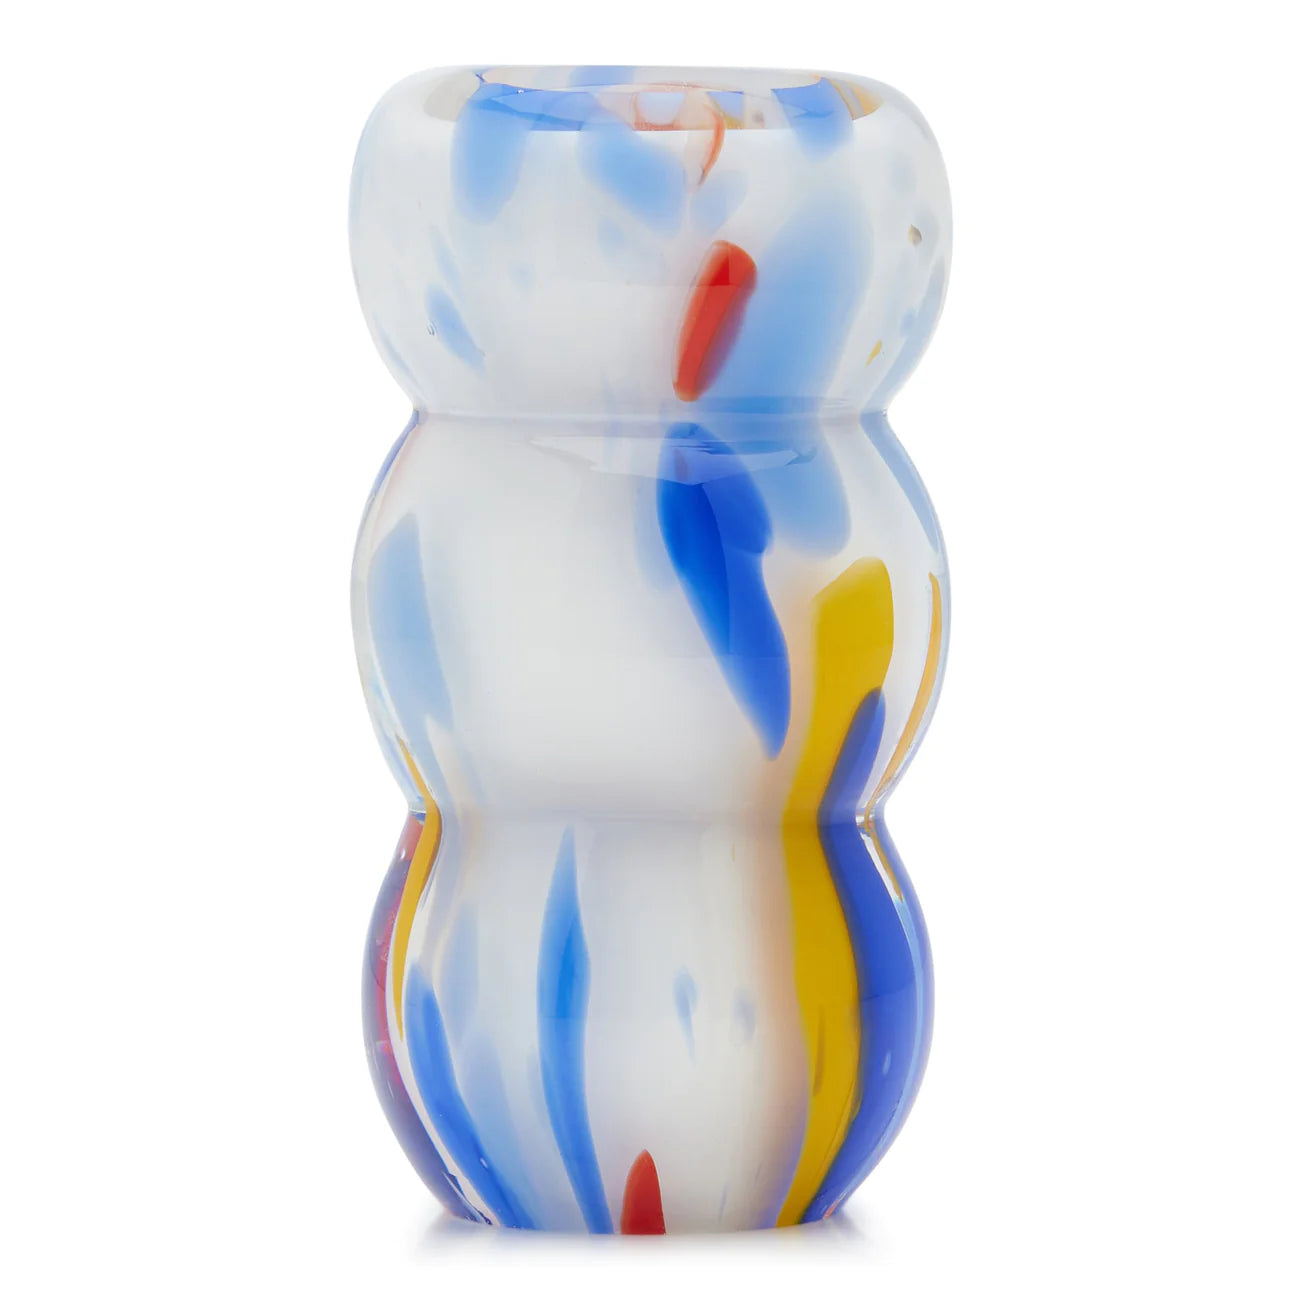 Primary Confetti Hand Blown Glass Candleholder